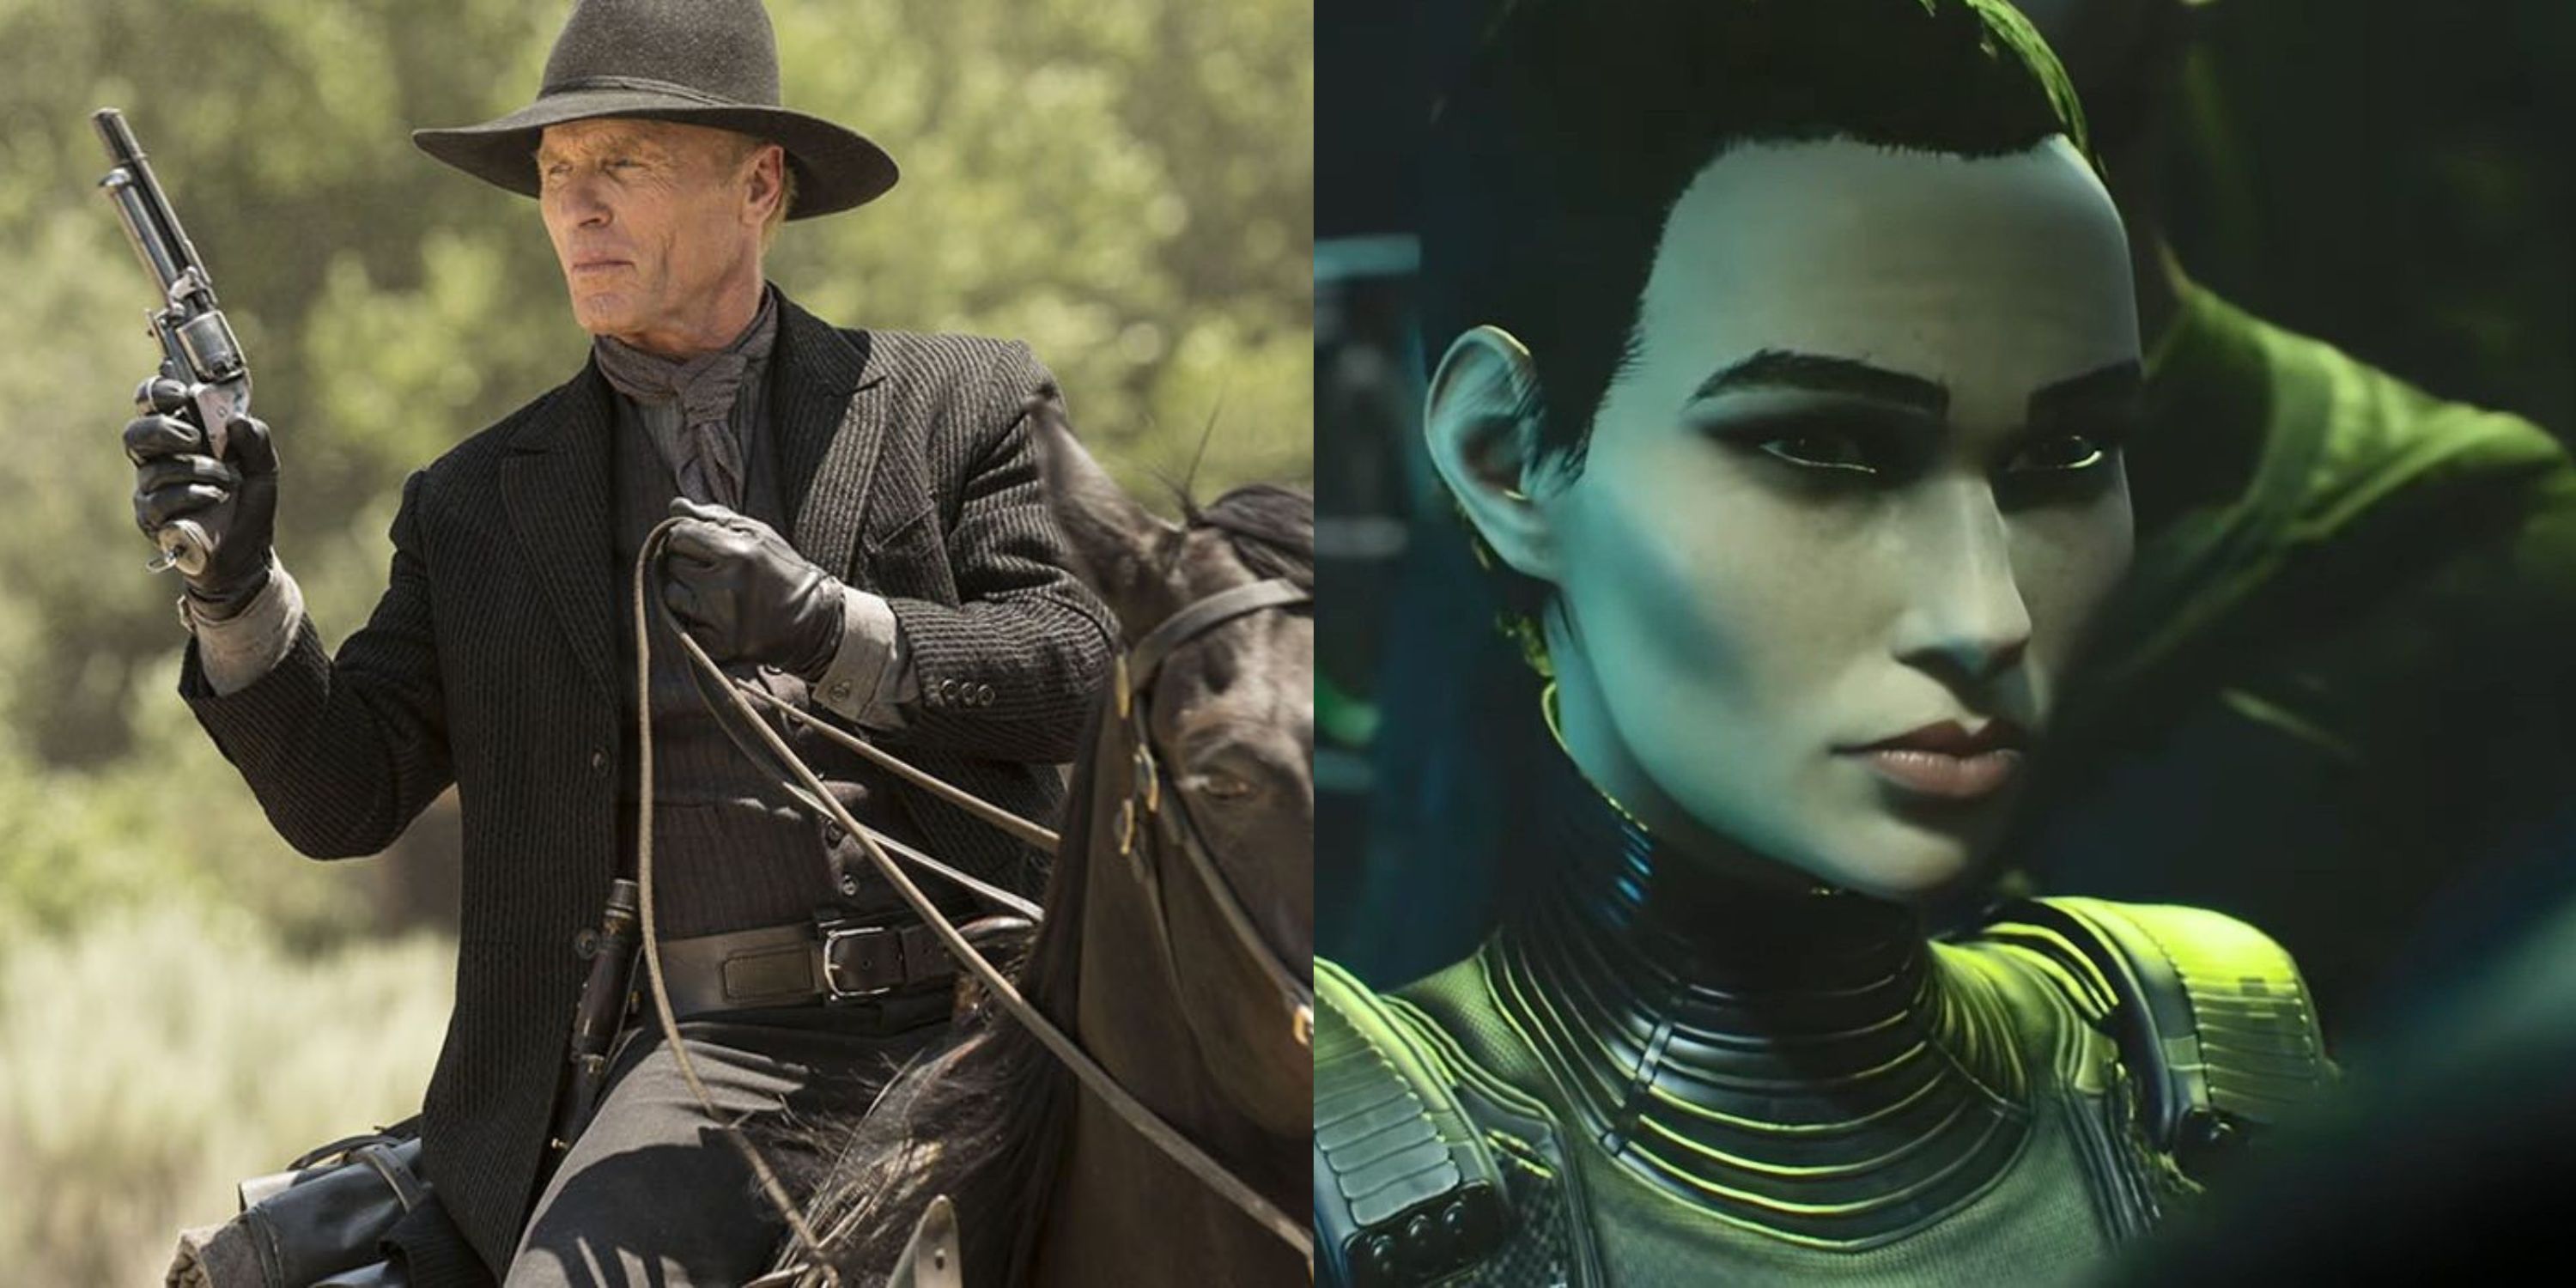 10 Sci-Fi TV Shows That Would Make Great Video Games